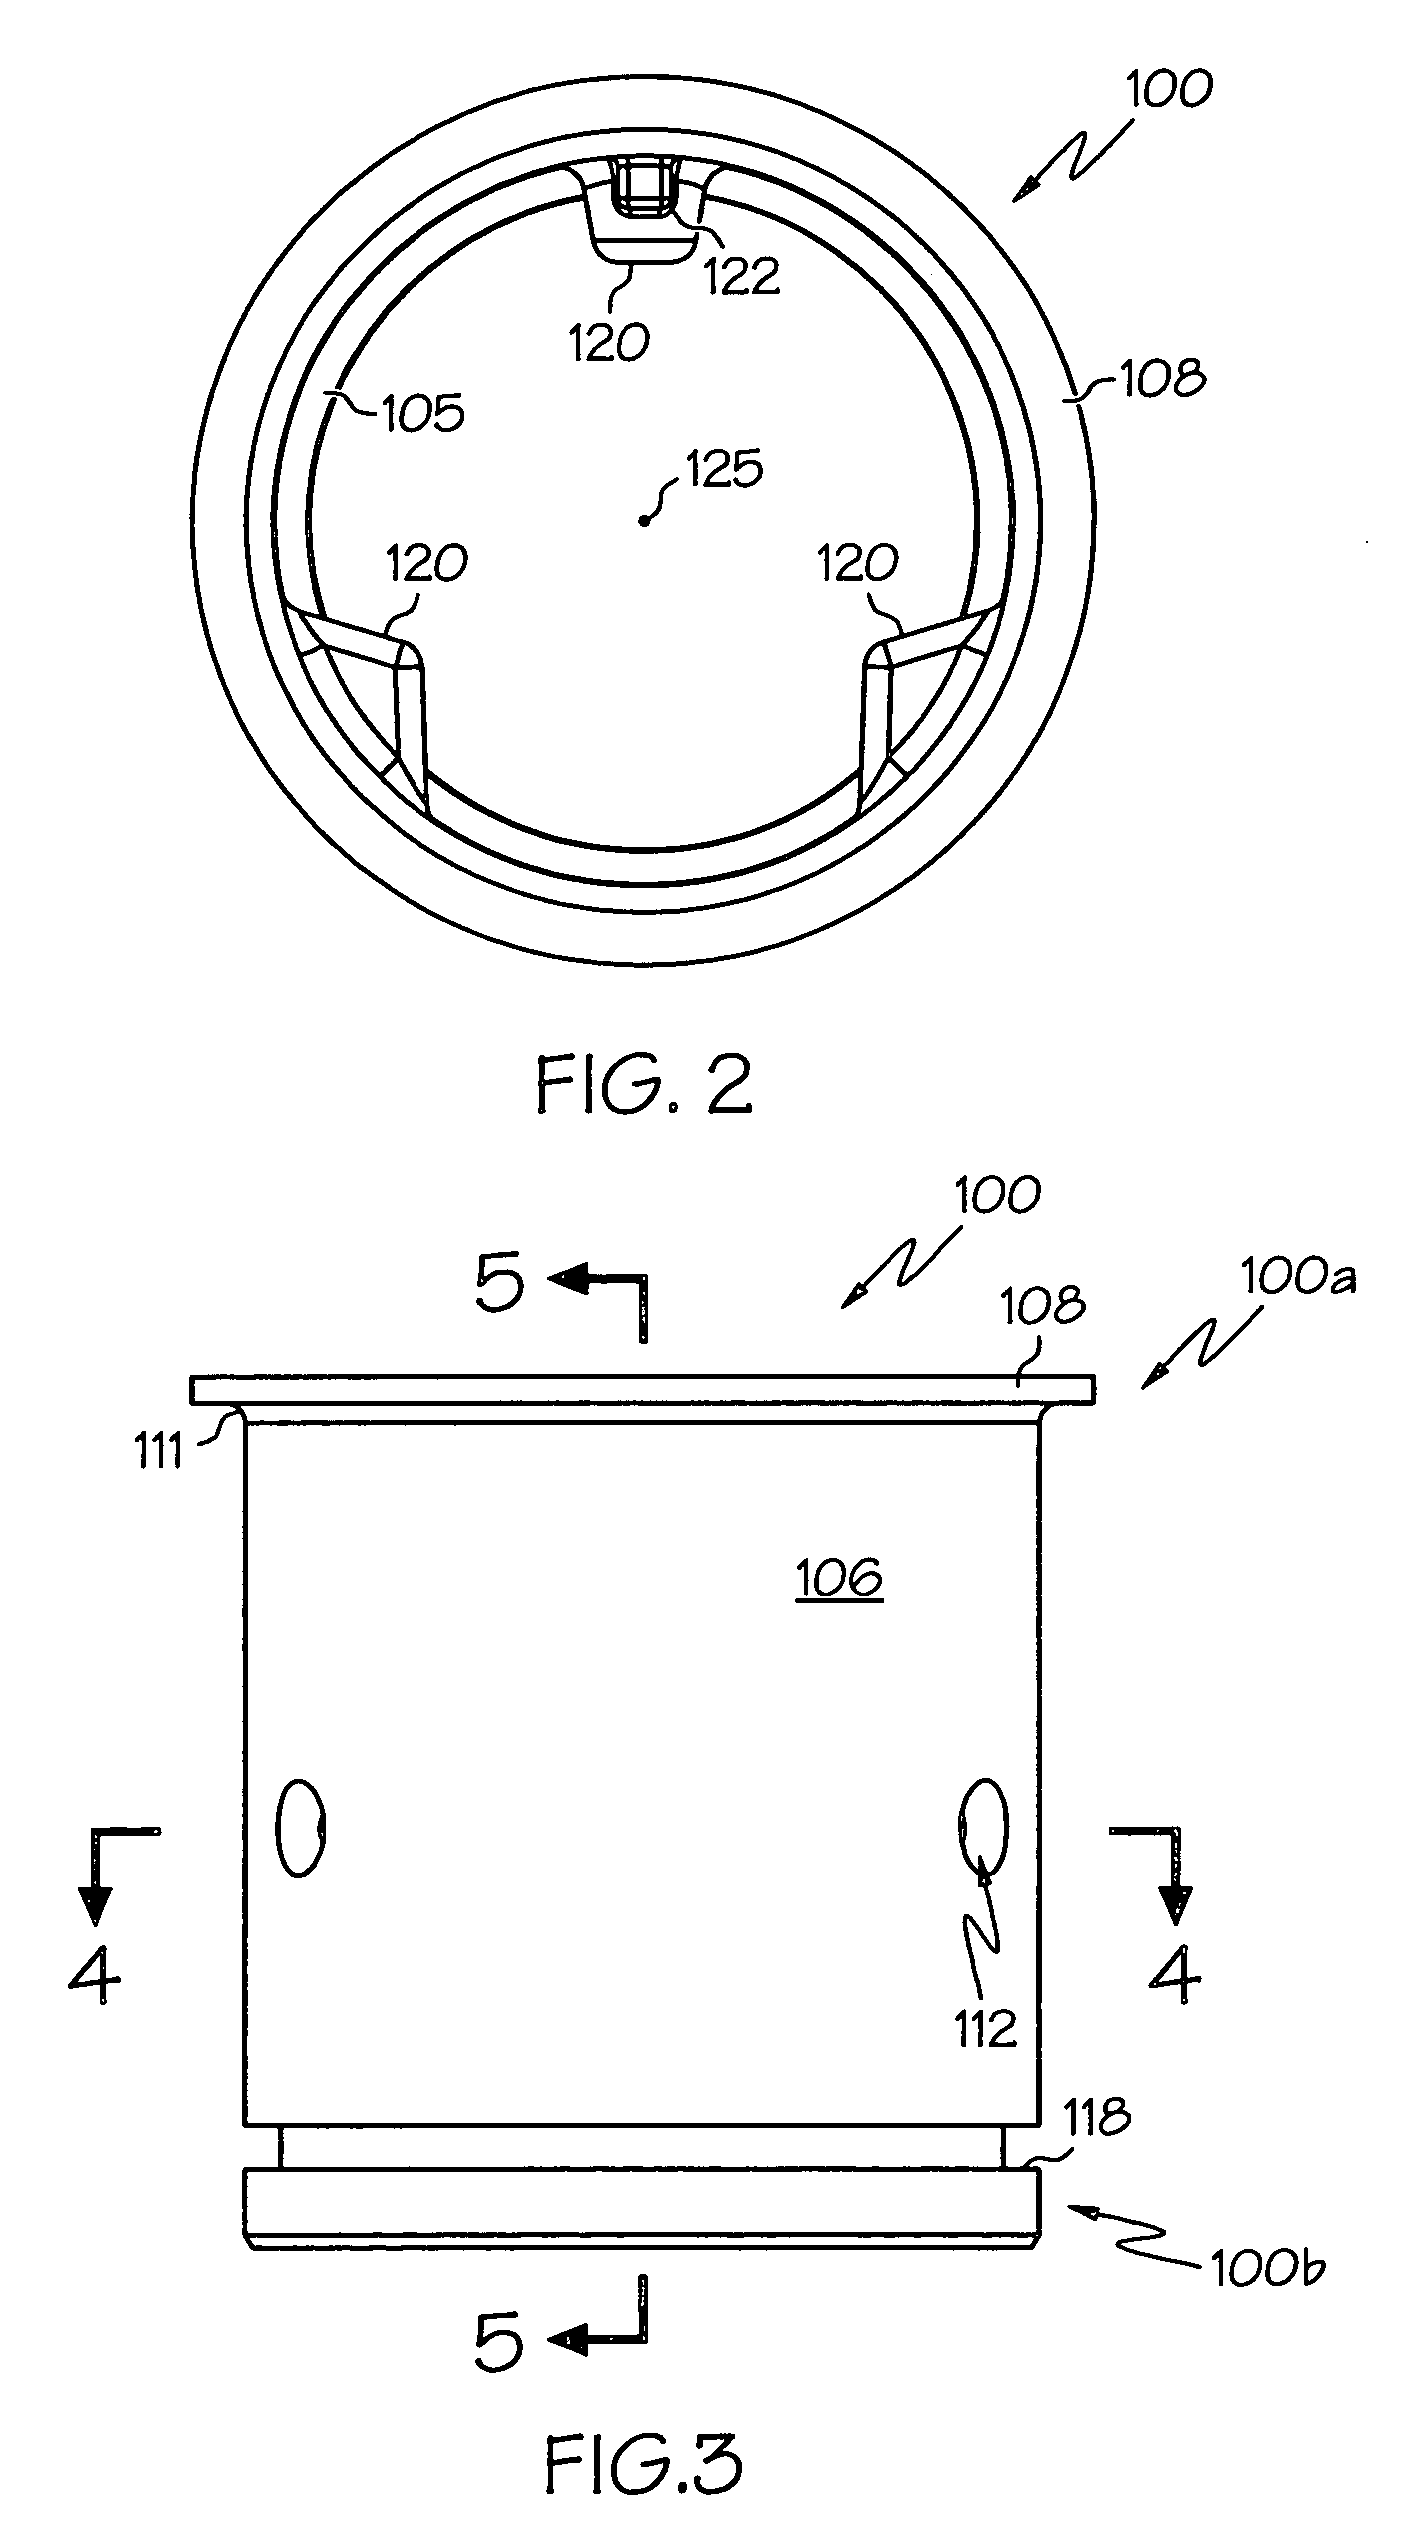 Drop tube inserts and apparatus adapted for use with a riser pipe